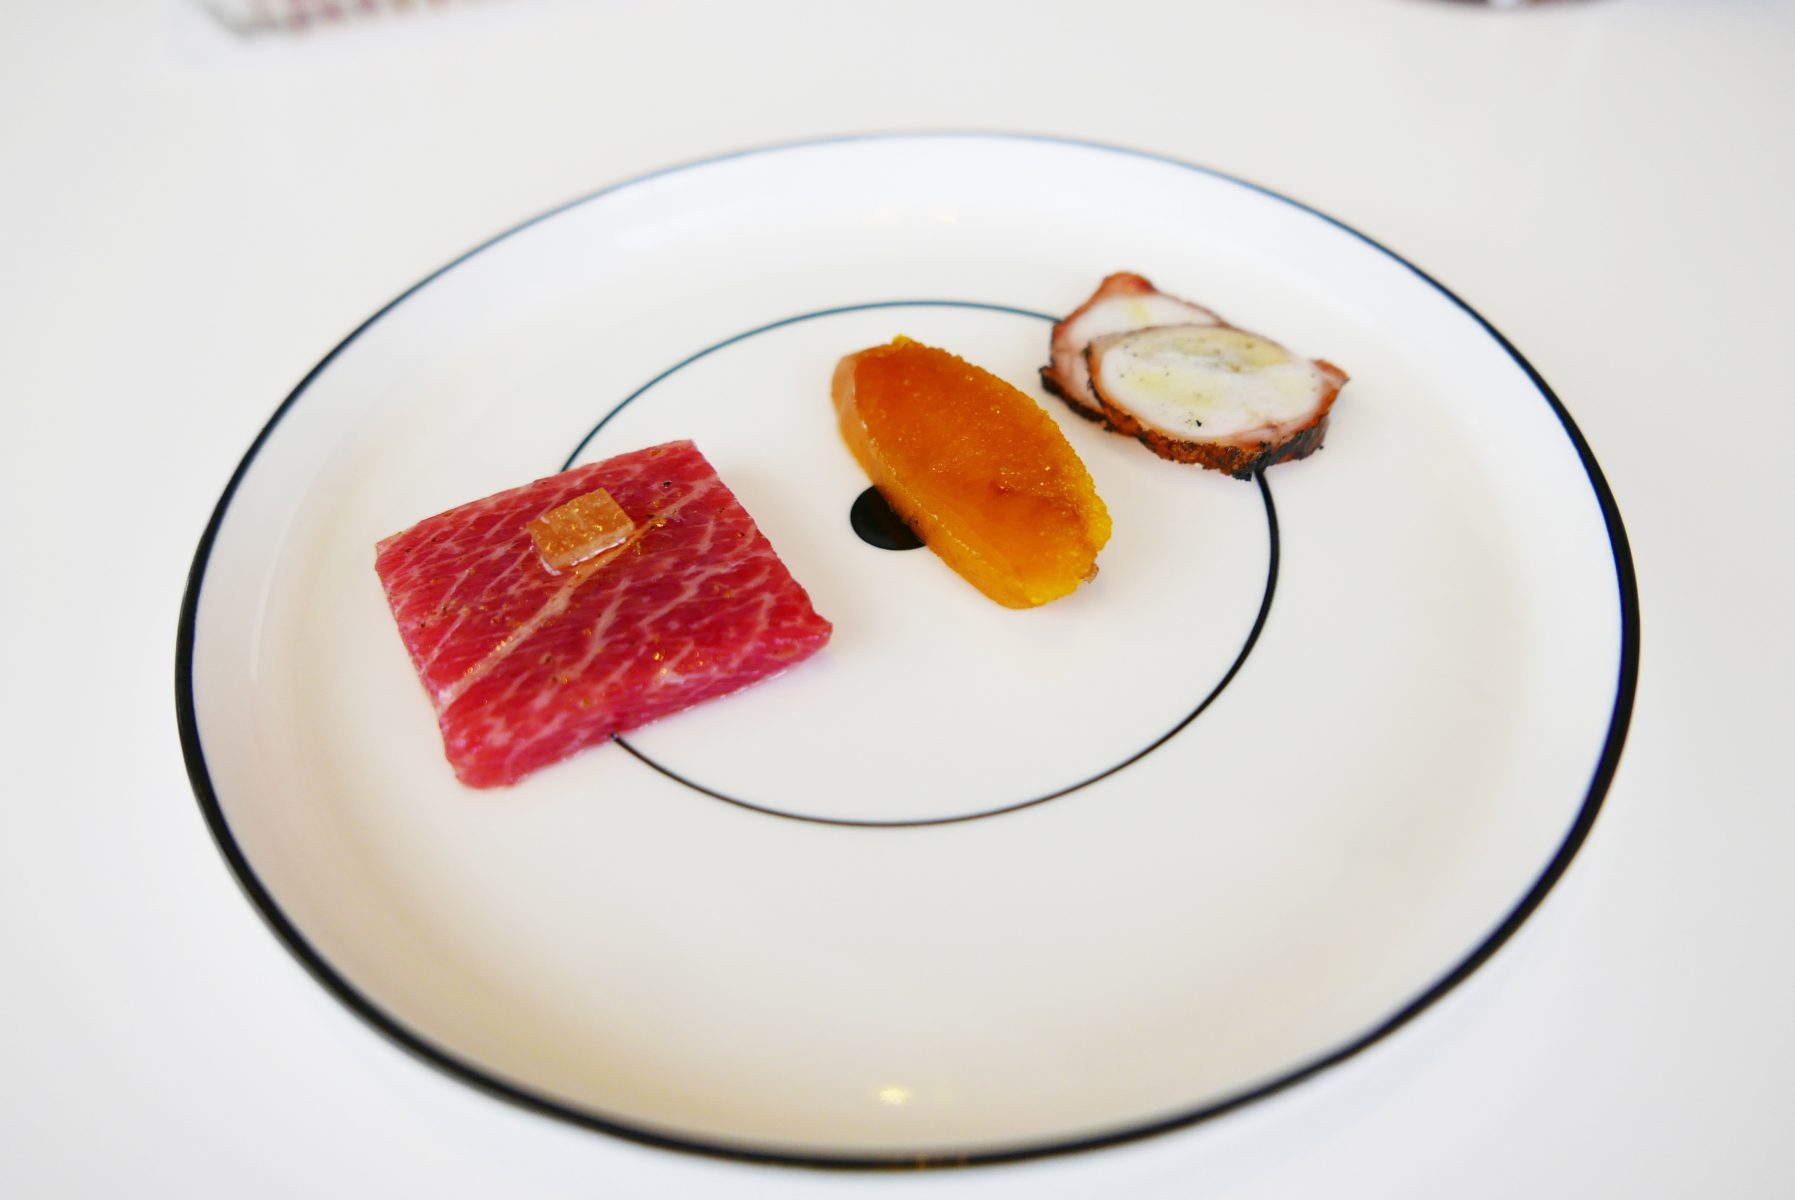 Dried octopus, mullet roe and local fatty tuna cured in sugared kombu at Quique Dacosta, Denia.